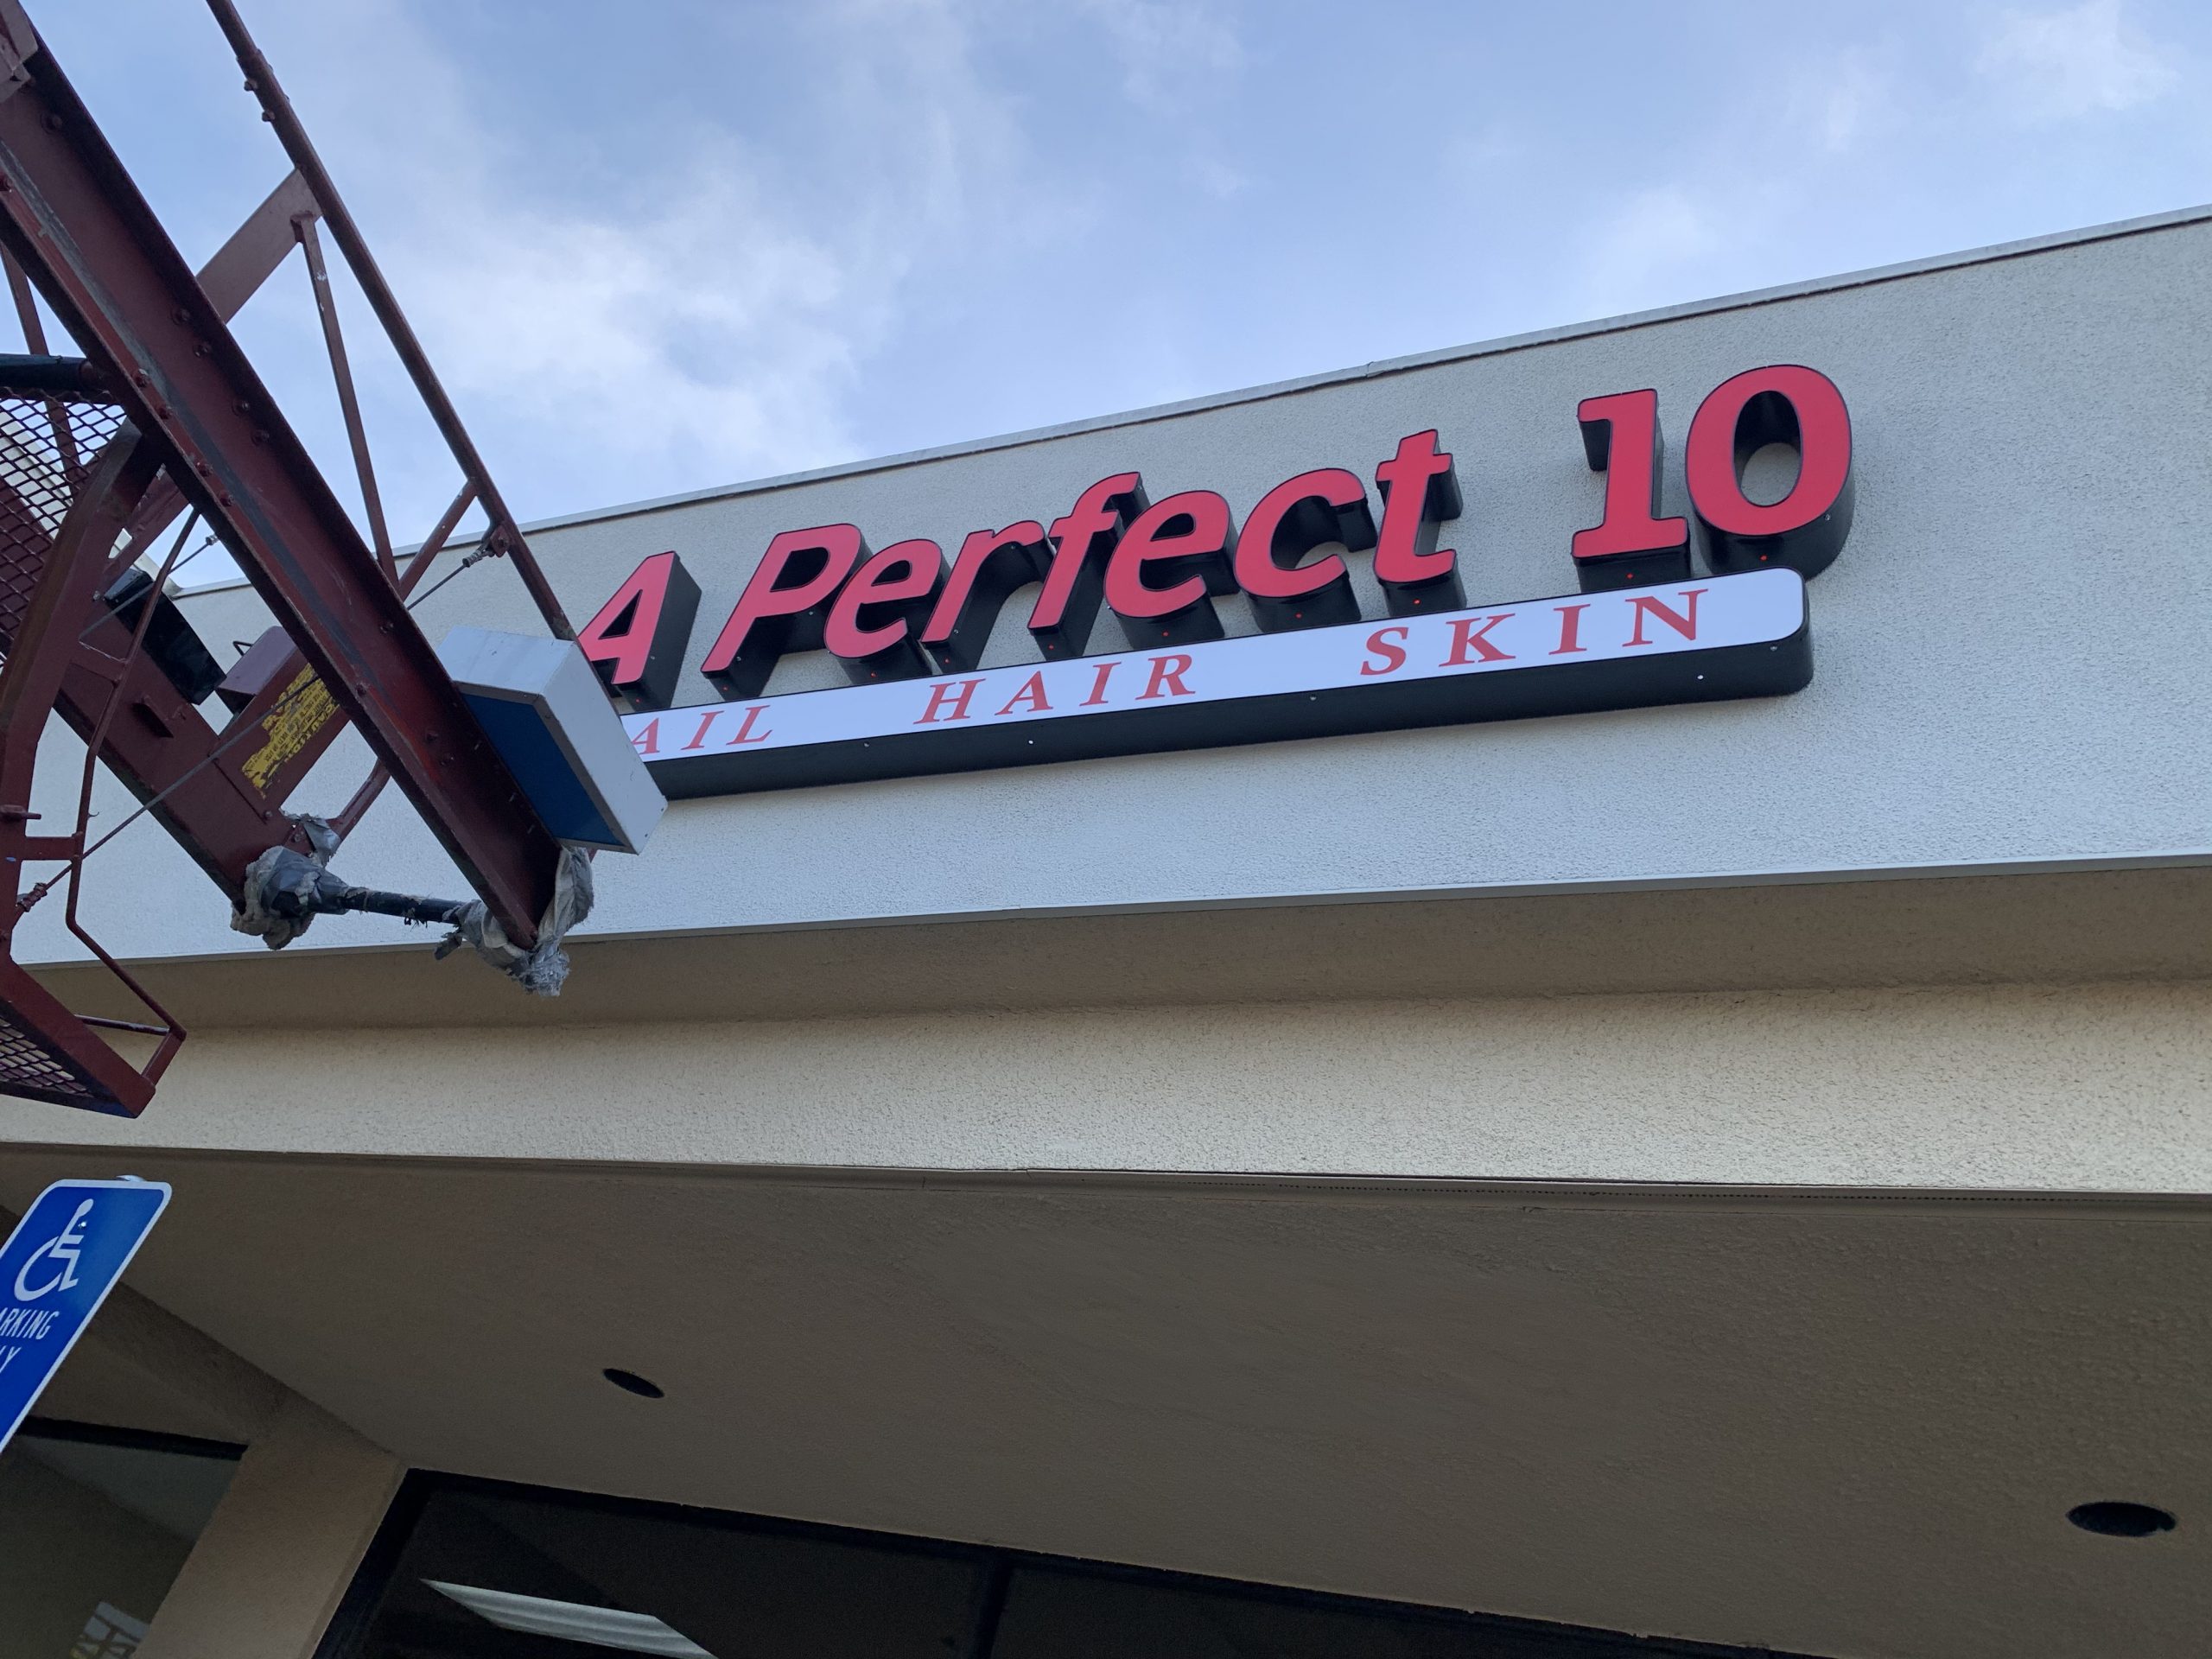 The channel letters entrance sign we fabricated and installed for A Perfect 10 Salon in Encino.